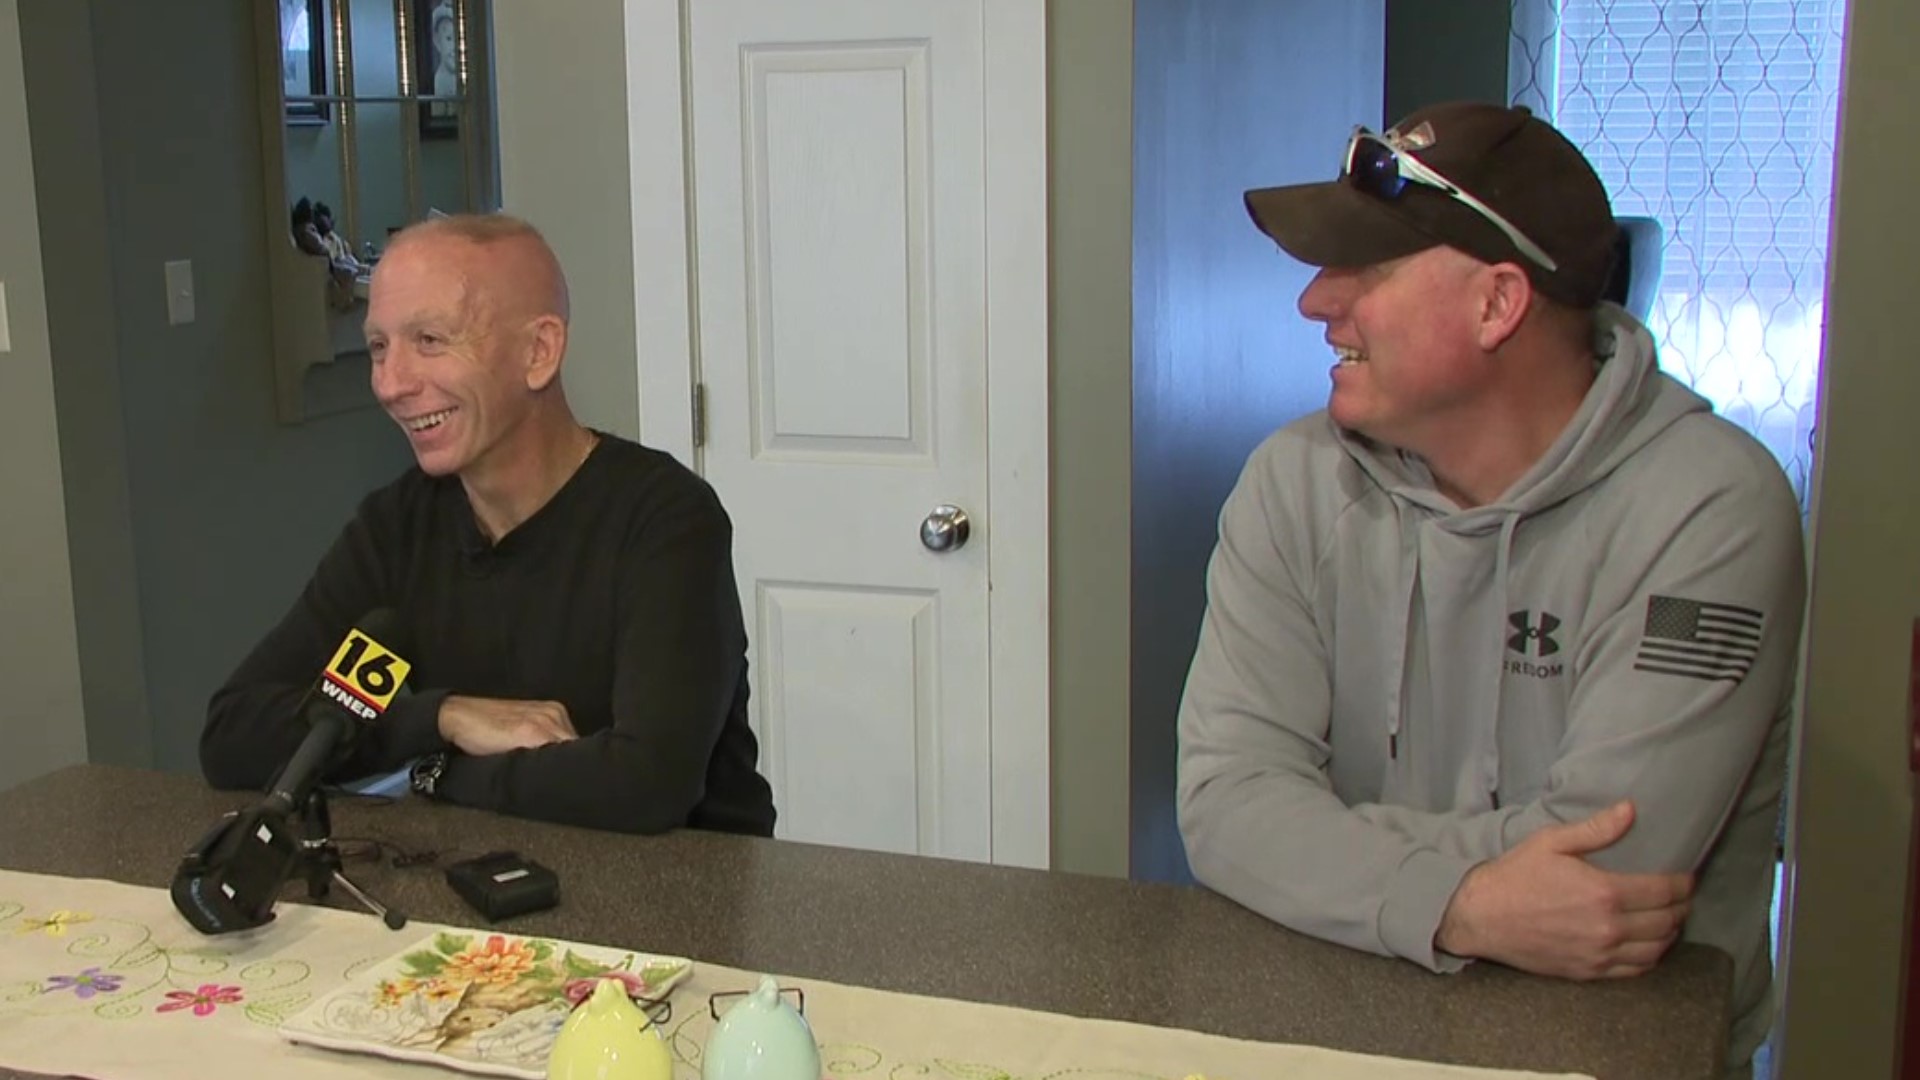 Newswatch 16's Nikki Krize caught up with two men who share more than friendship.